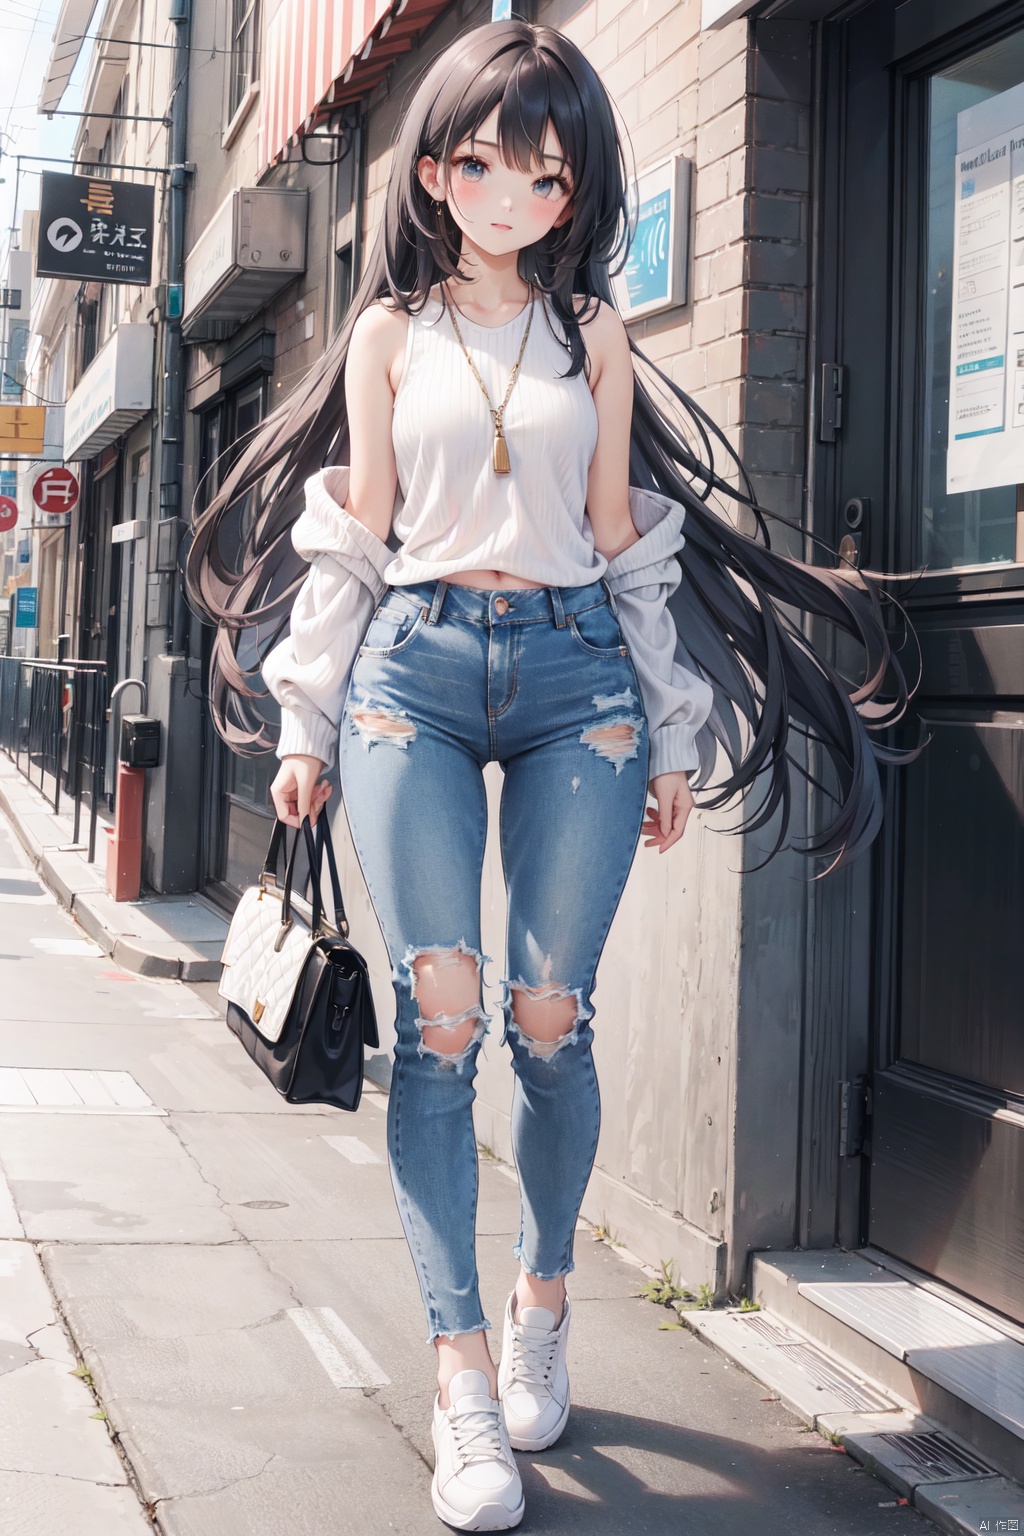 Sexy sleeveless translucent wide fashion sweater, long hair, medium chest, sexy hip exposed ultra-short jeans, slender legs, bare legs, sneaker, full body image